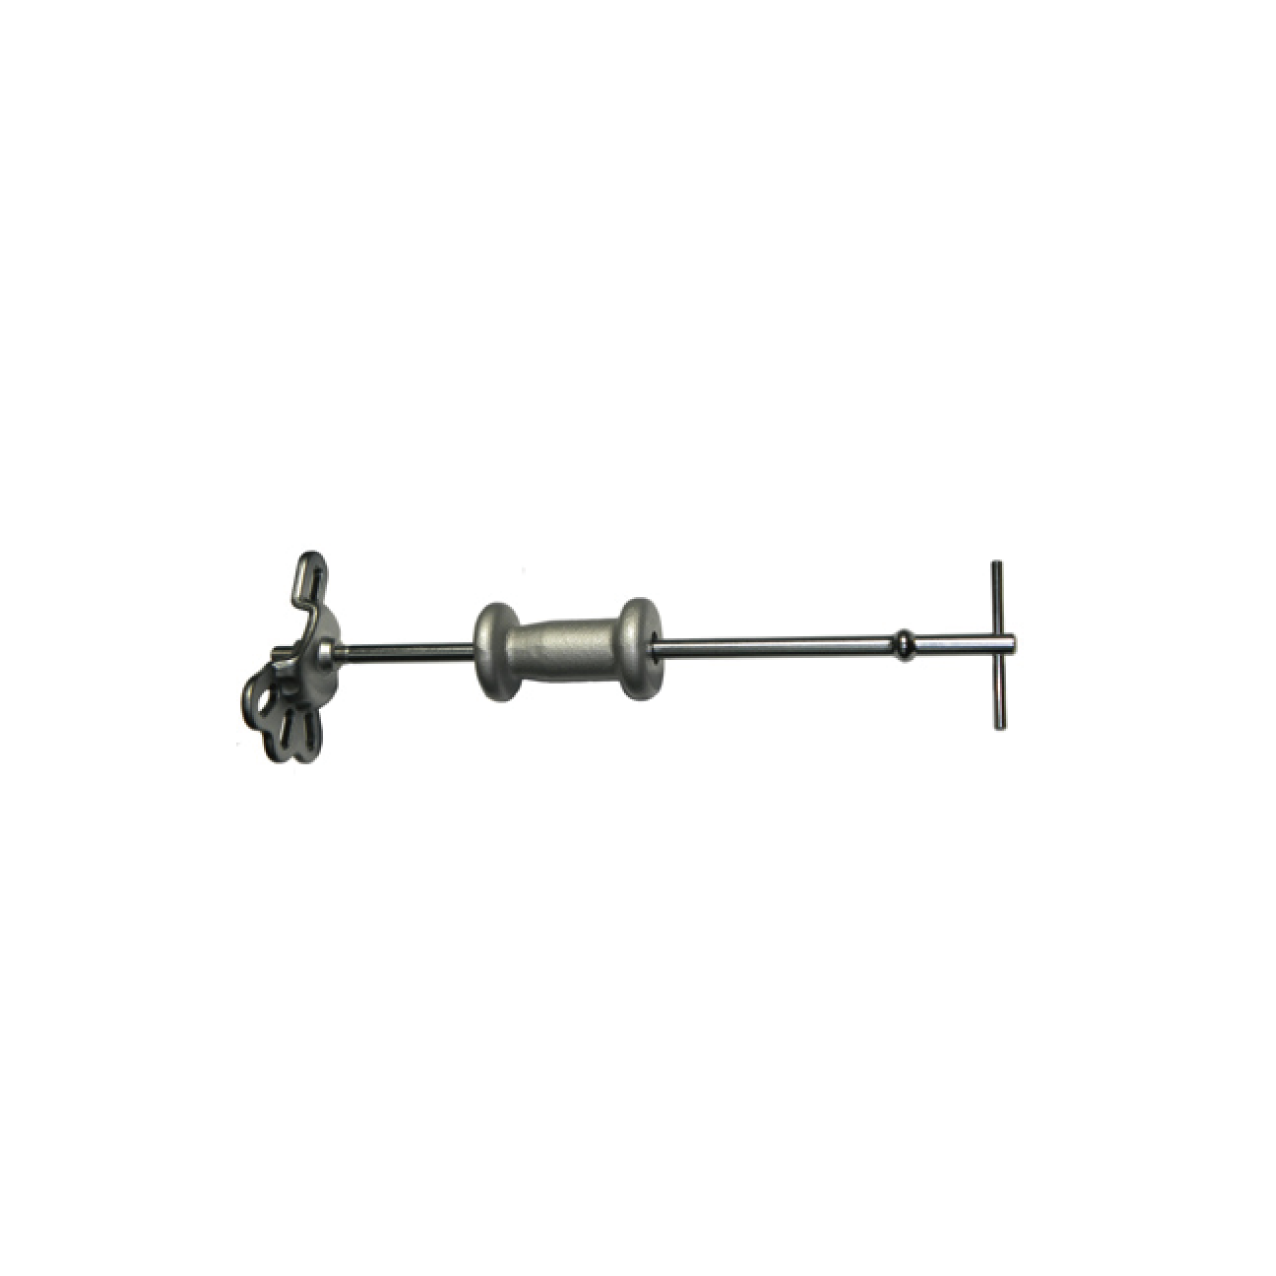  FRONT WHEEL DRIVE AXLE PULLER